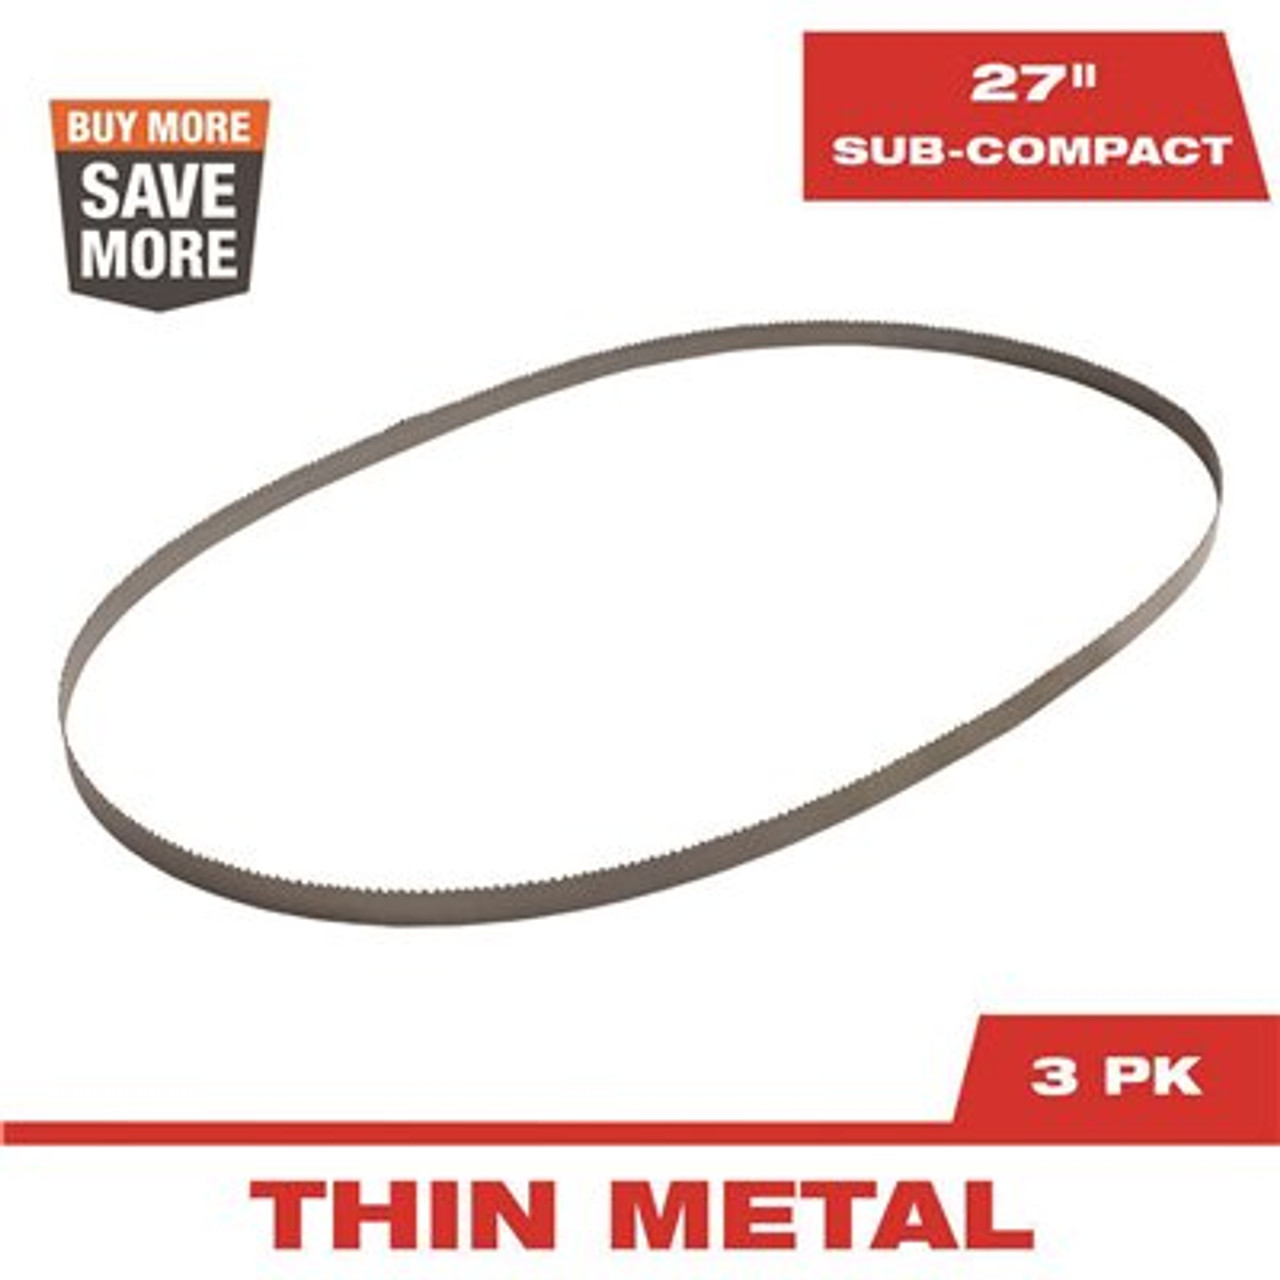 Milwaukee 27 in 18 TPI Sub Compact Steel Band Saw Blade (3-Pack) For M12 Bandsaw